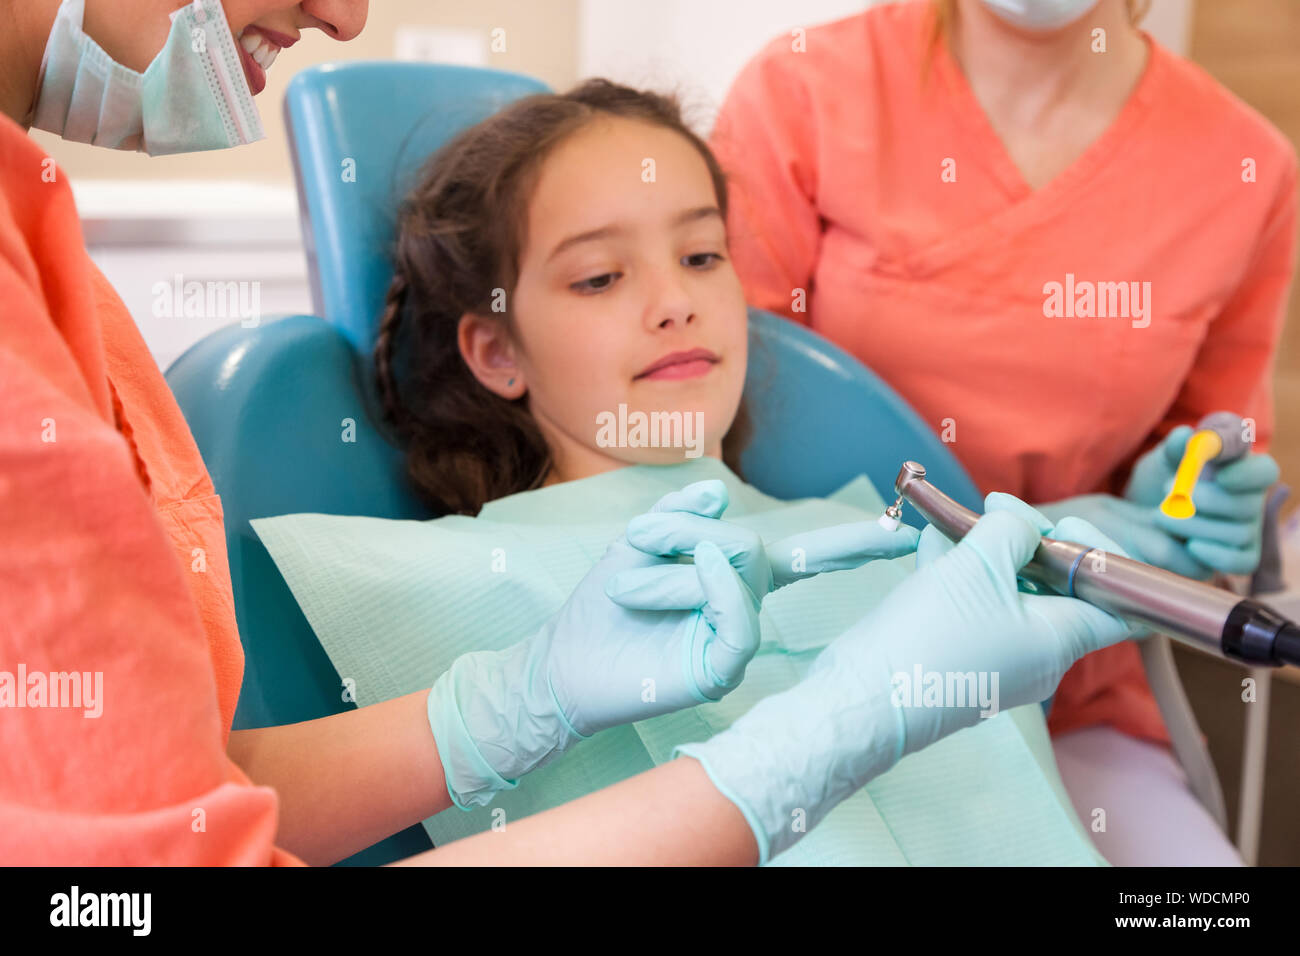 Pretty young girl a the dentist surgery for checkup with female dentist and assistant. Dentist showing dentist tool, close-up Stock Photo